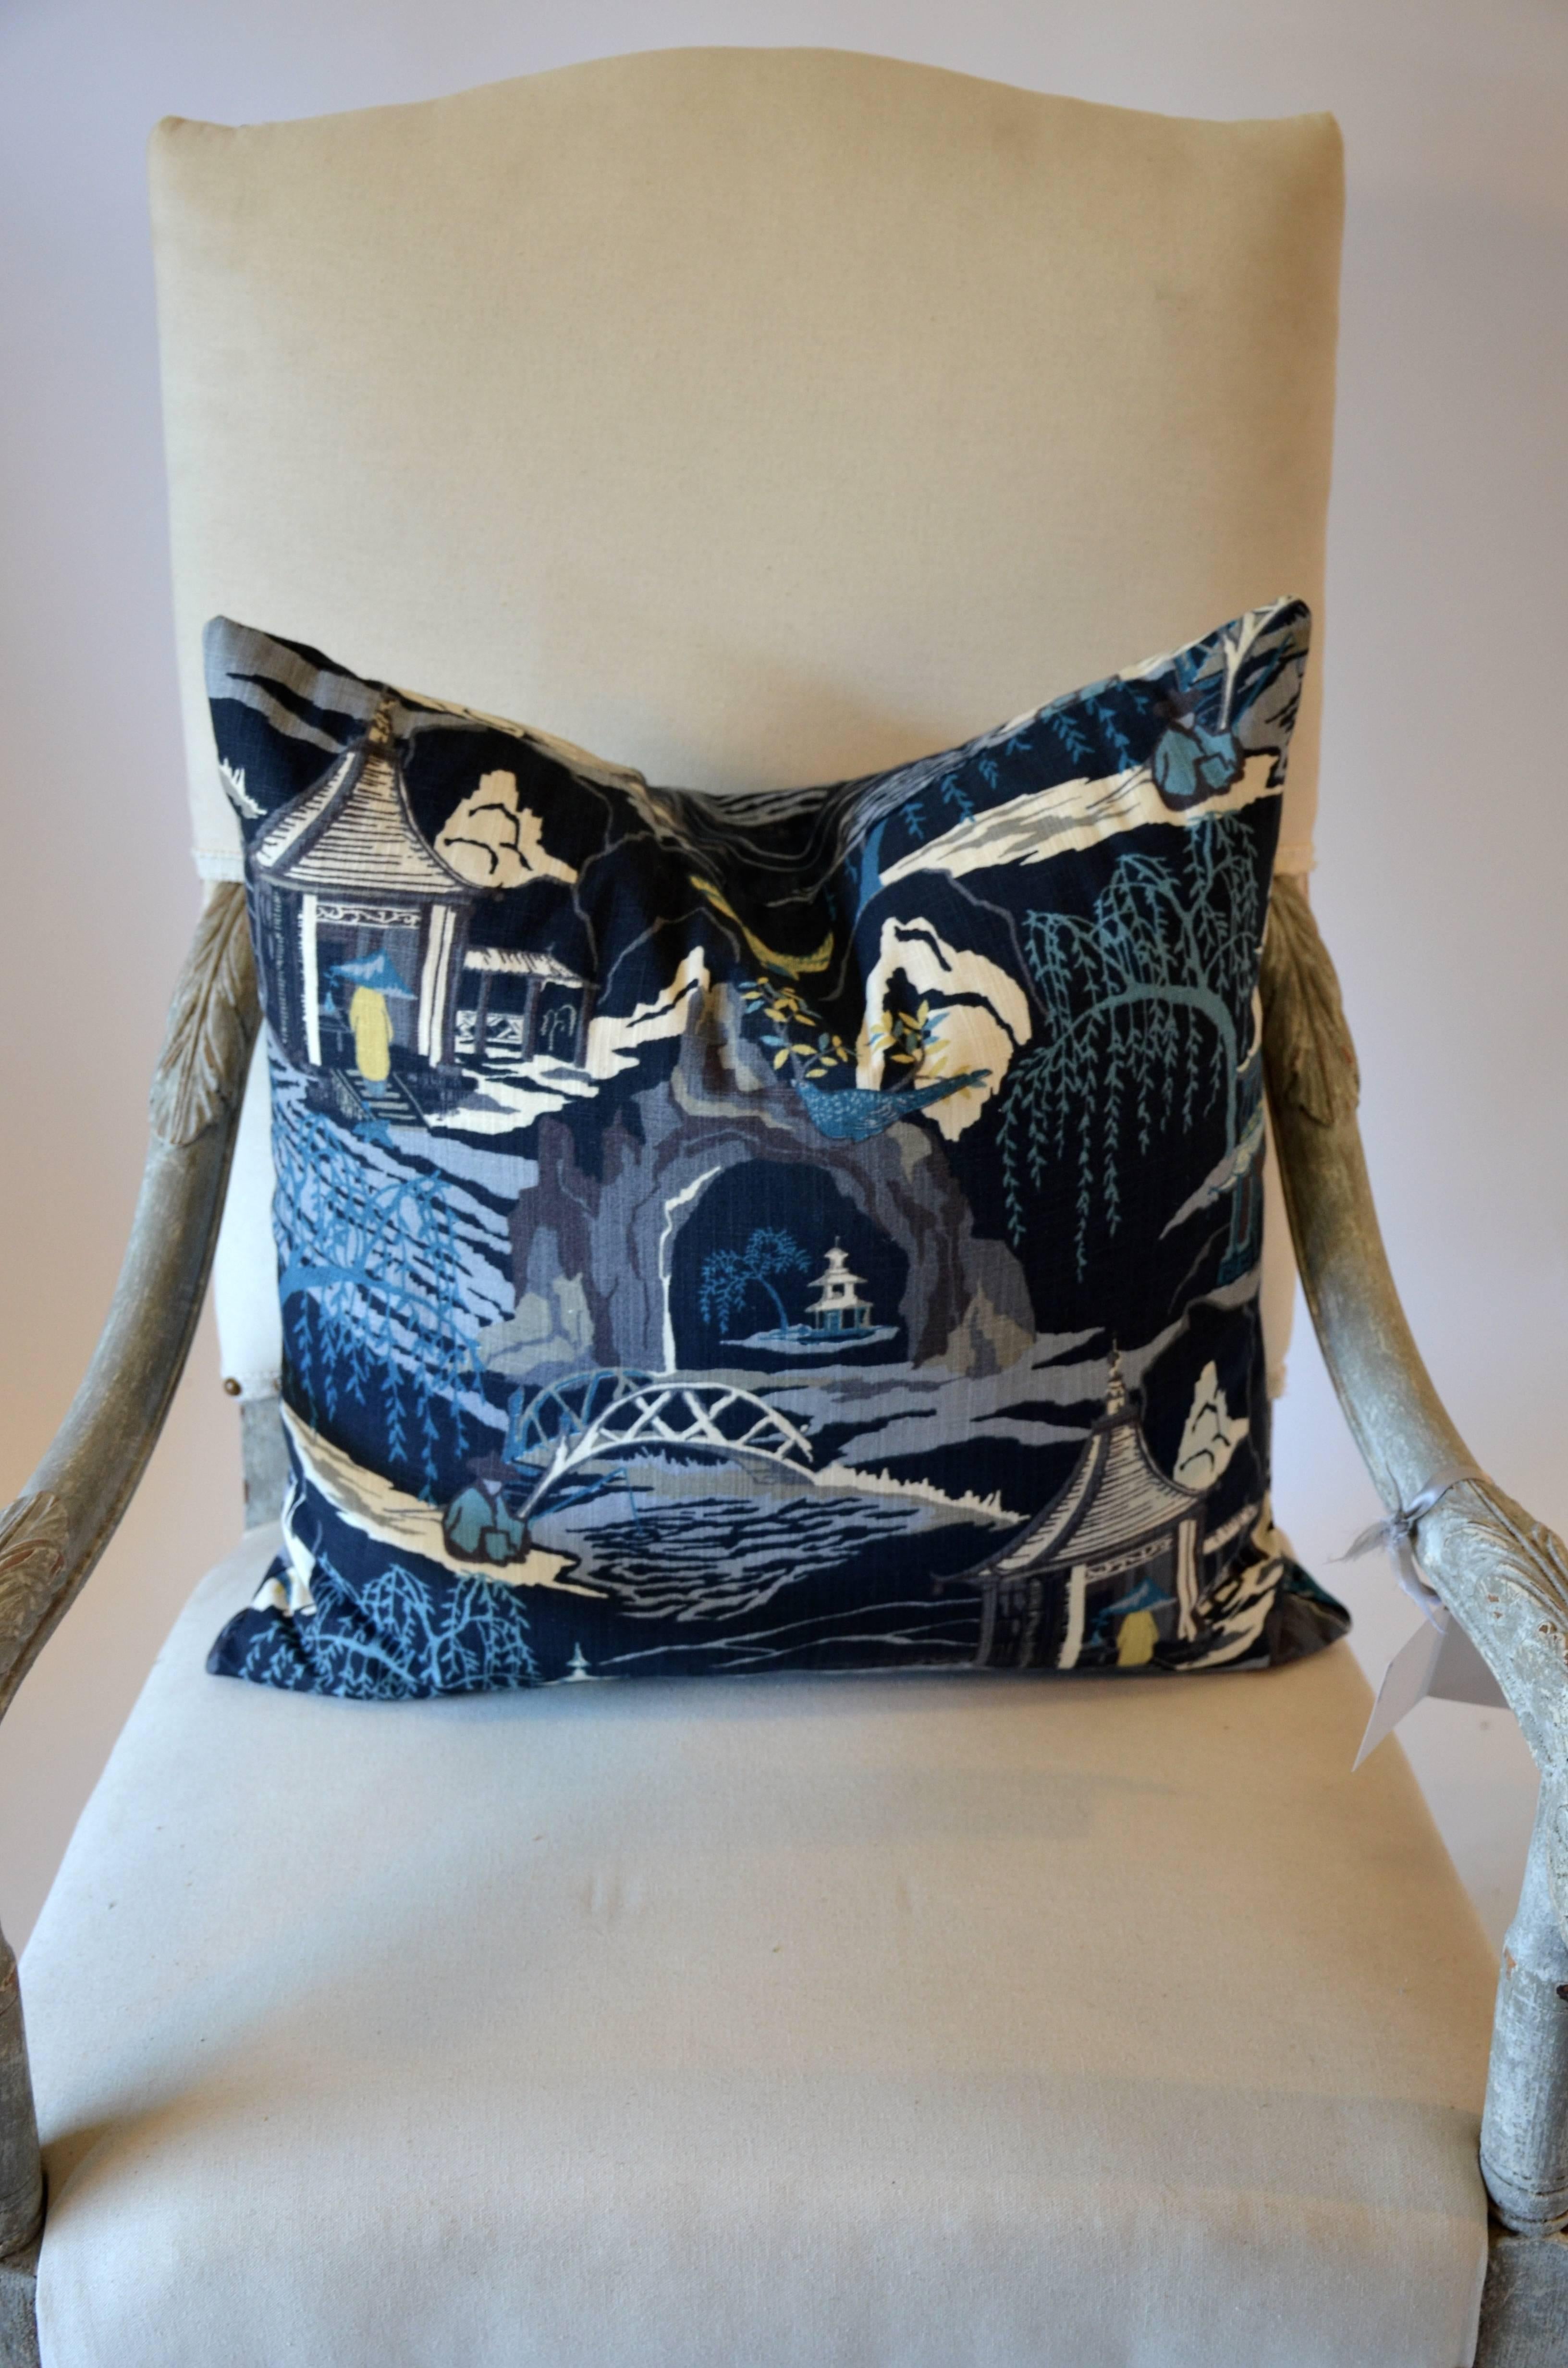 Indigo Nights Toile Pillow In Excellent Condition For Sale In Southampton, NY